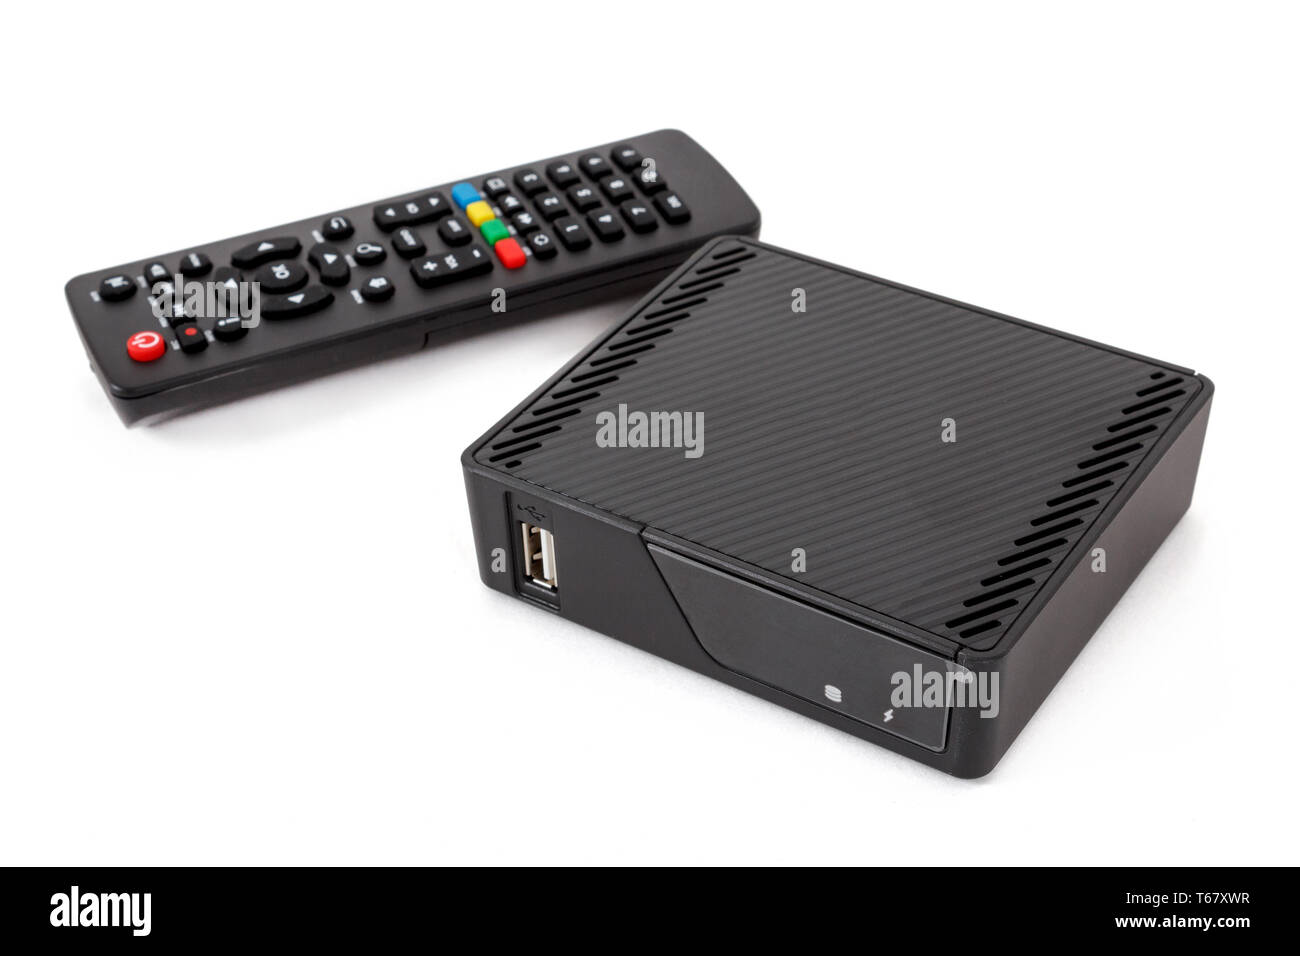 Android TV set top box receiver Stock Photo - Alamy